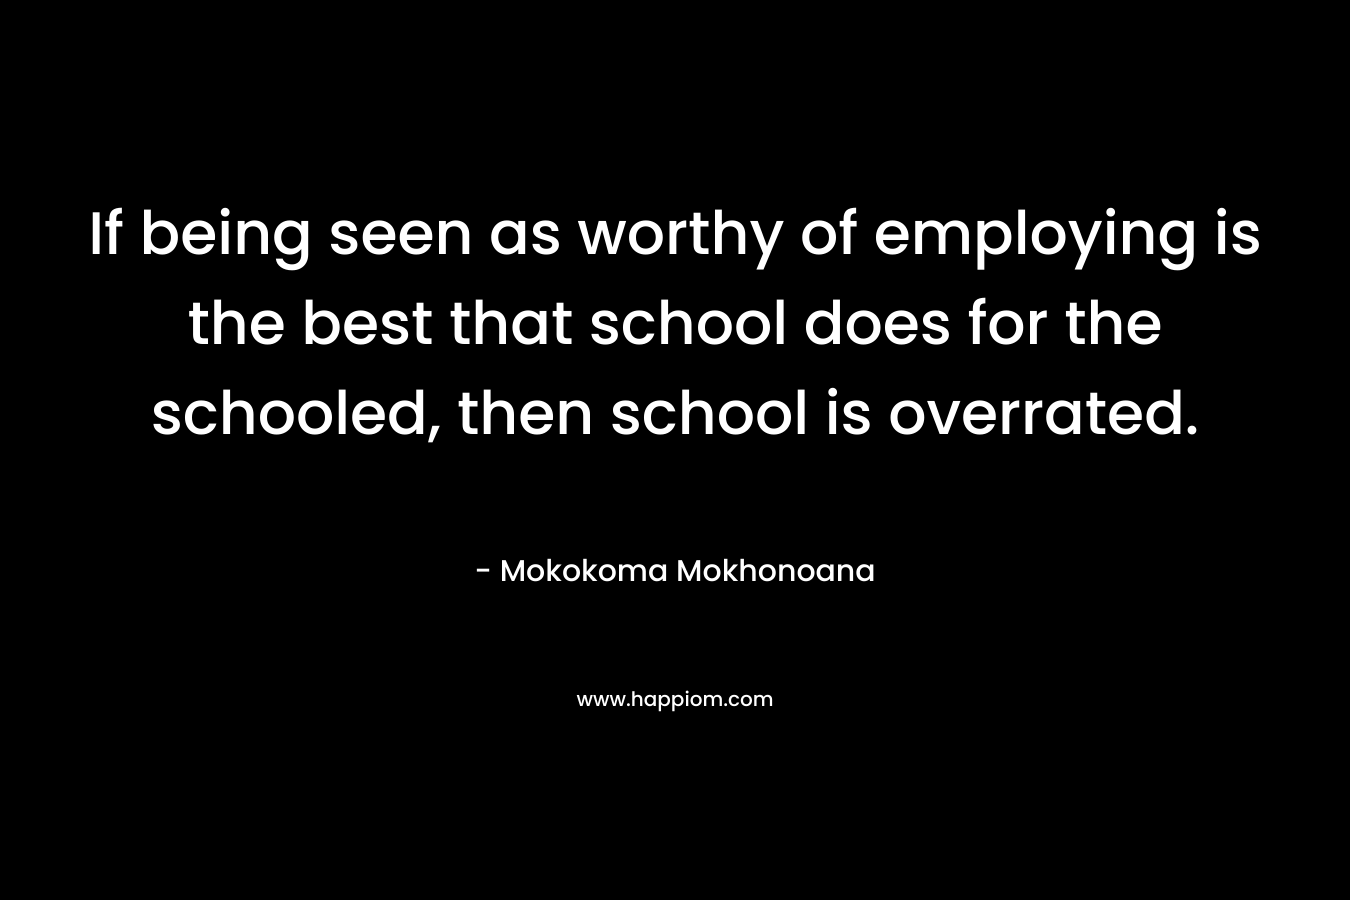 If being seen as worthy of employing is the best that school does for the schooled, then school is overrated. – Mokokoma Mokhonoana